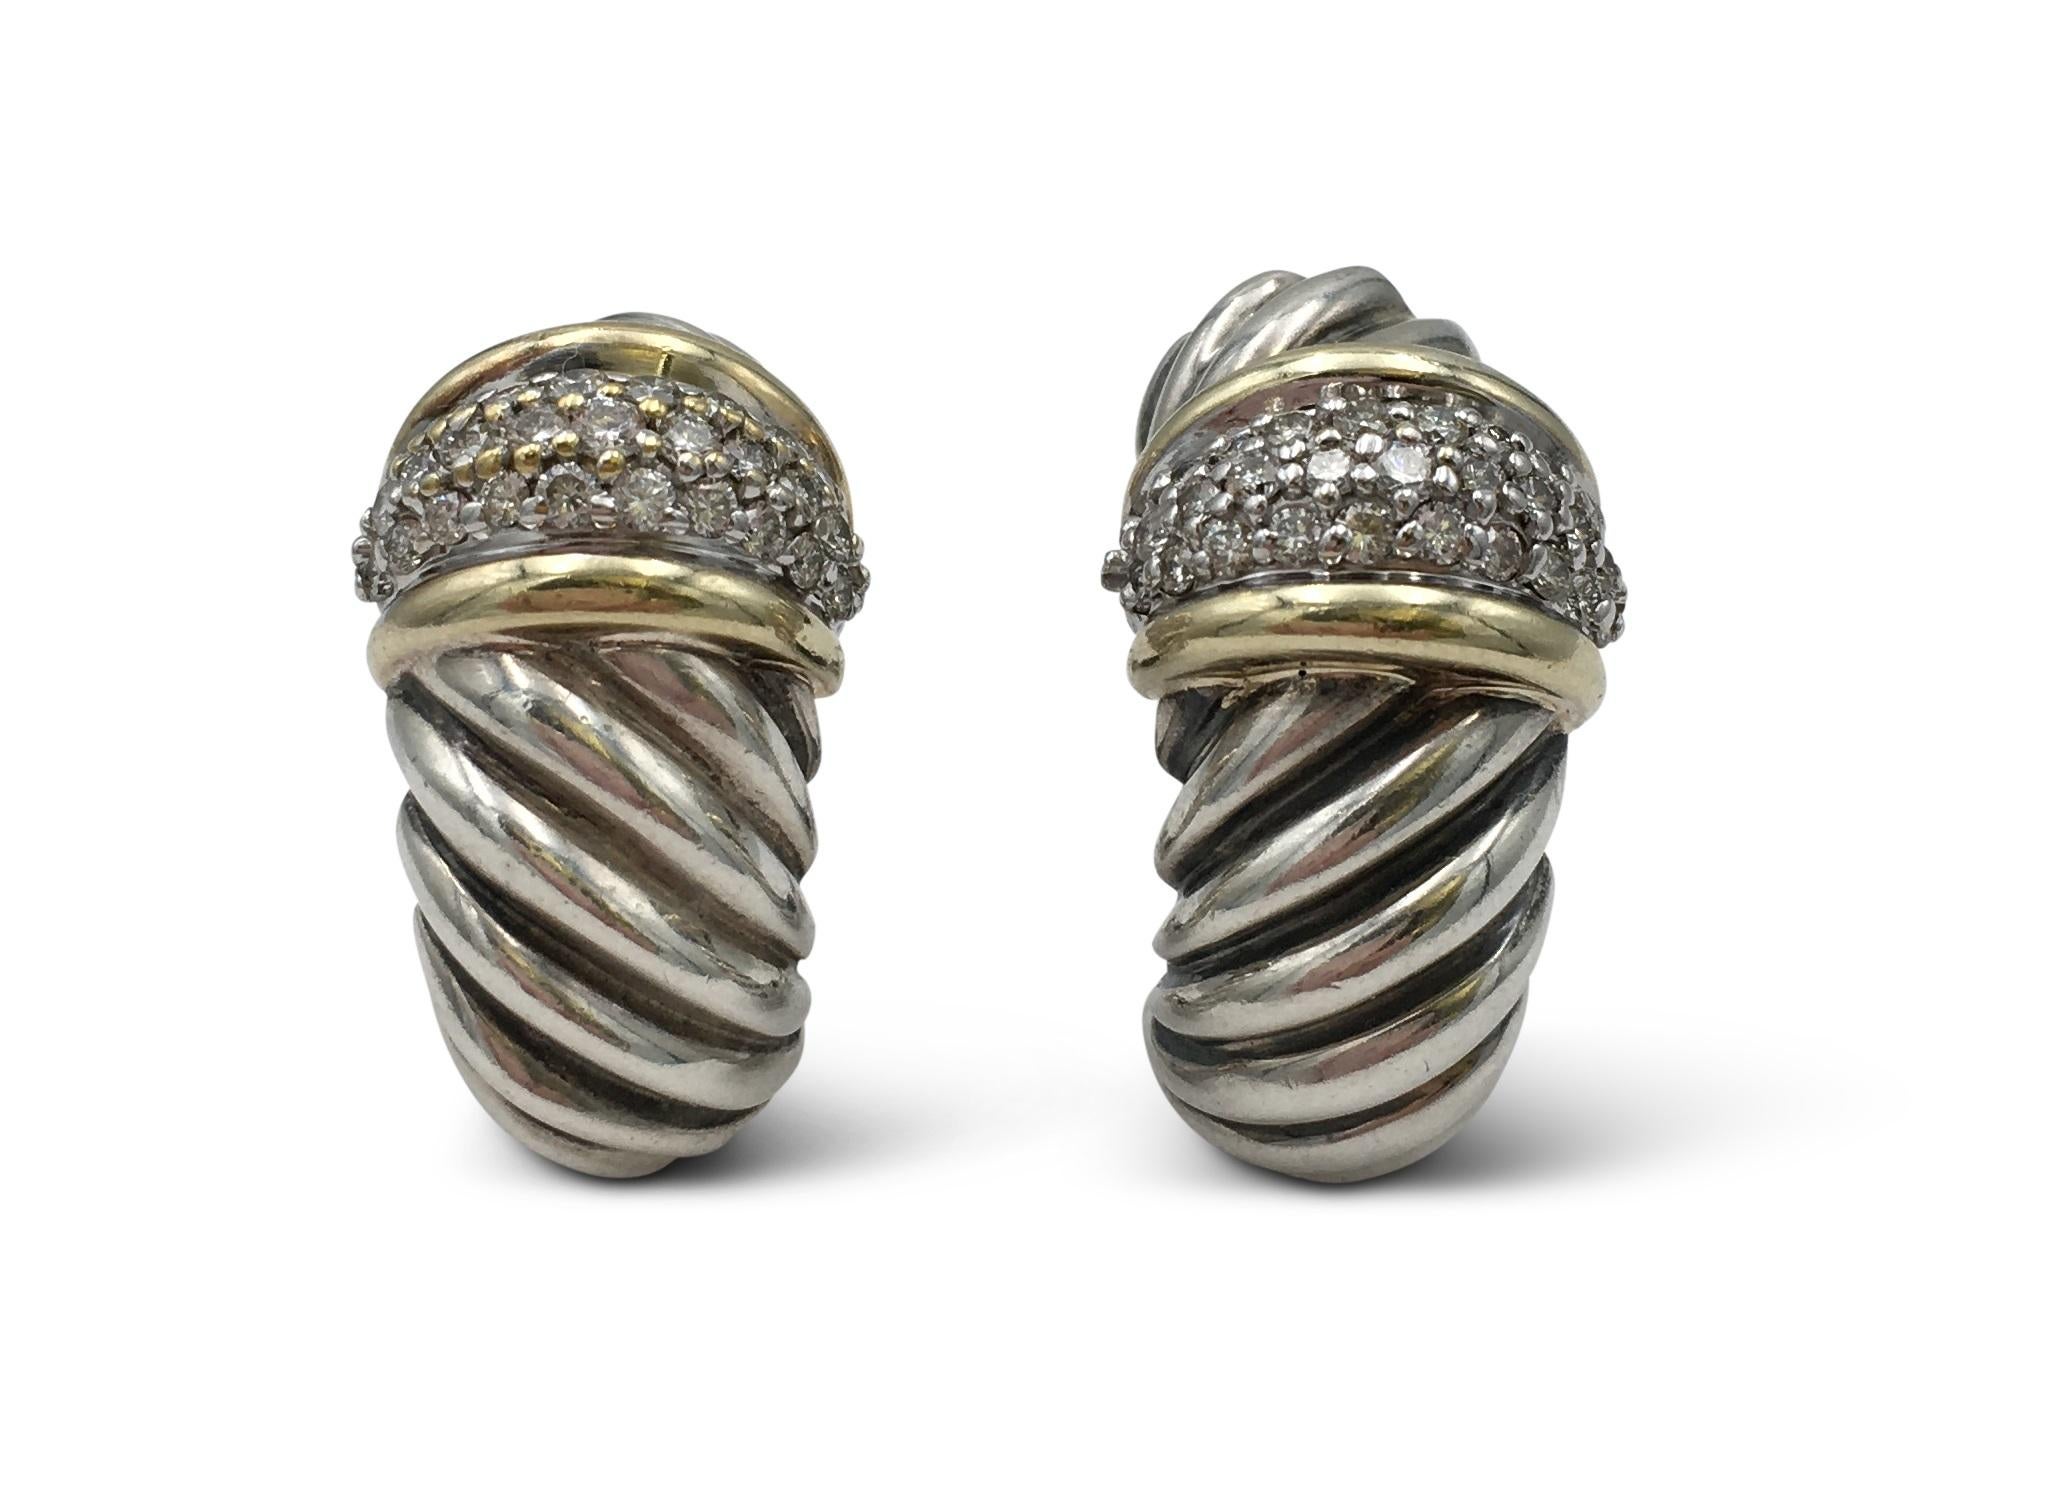 Authentic David Yurman silver and 18 karat yellow gold earrings from the Cable Collection. Set with an estimated 1.15 carats of round brilliant cut diamonds (F-G color, VS-SI clarity). Signed DY, 925, 750. The earrings are not presented with